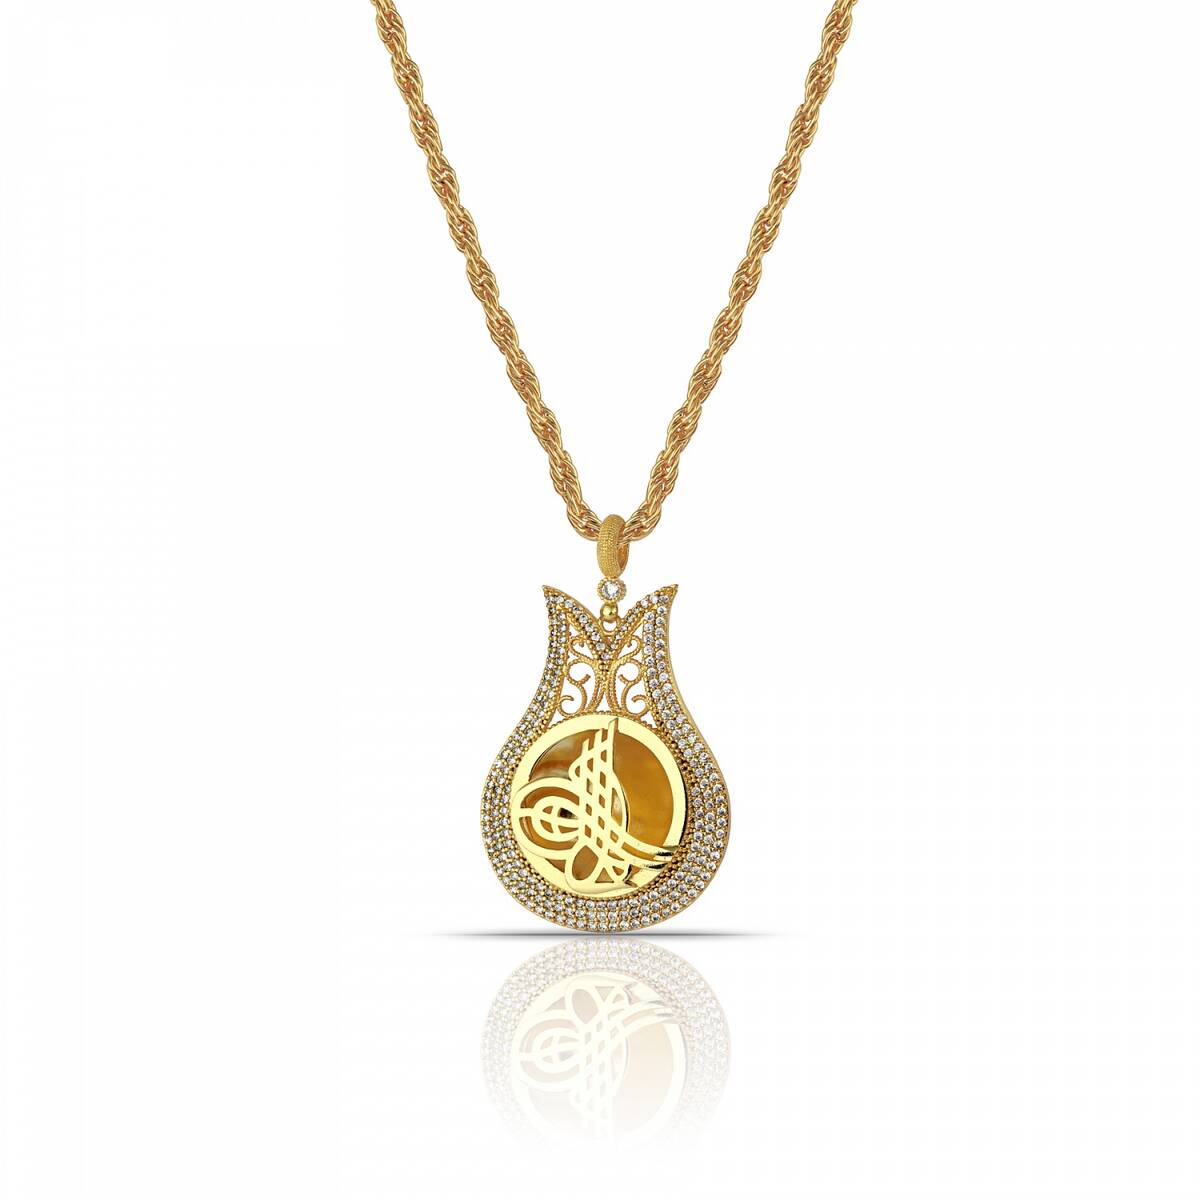 Women's necklace with the famous Ottoman logo design